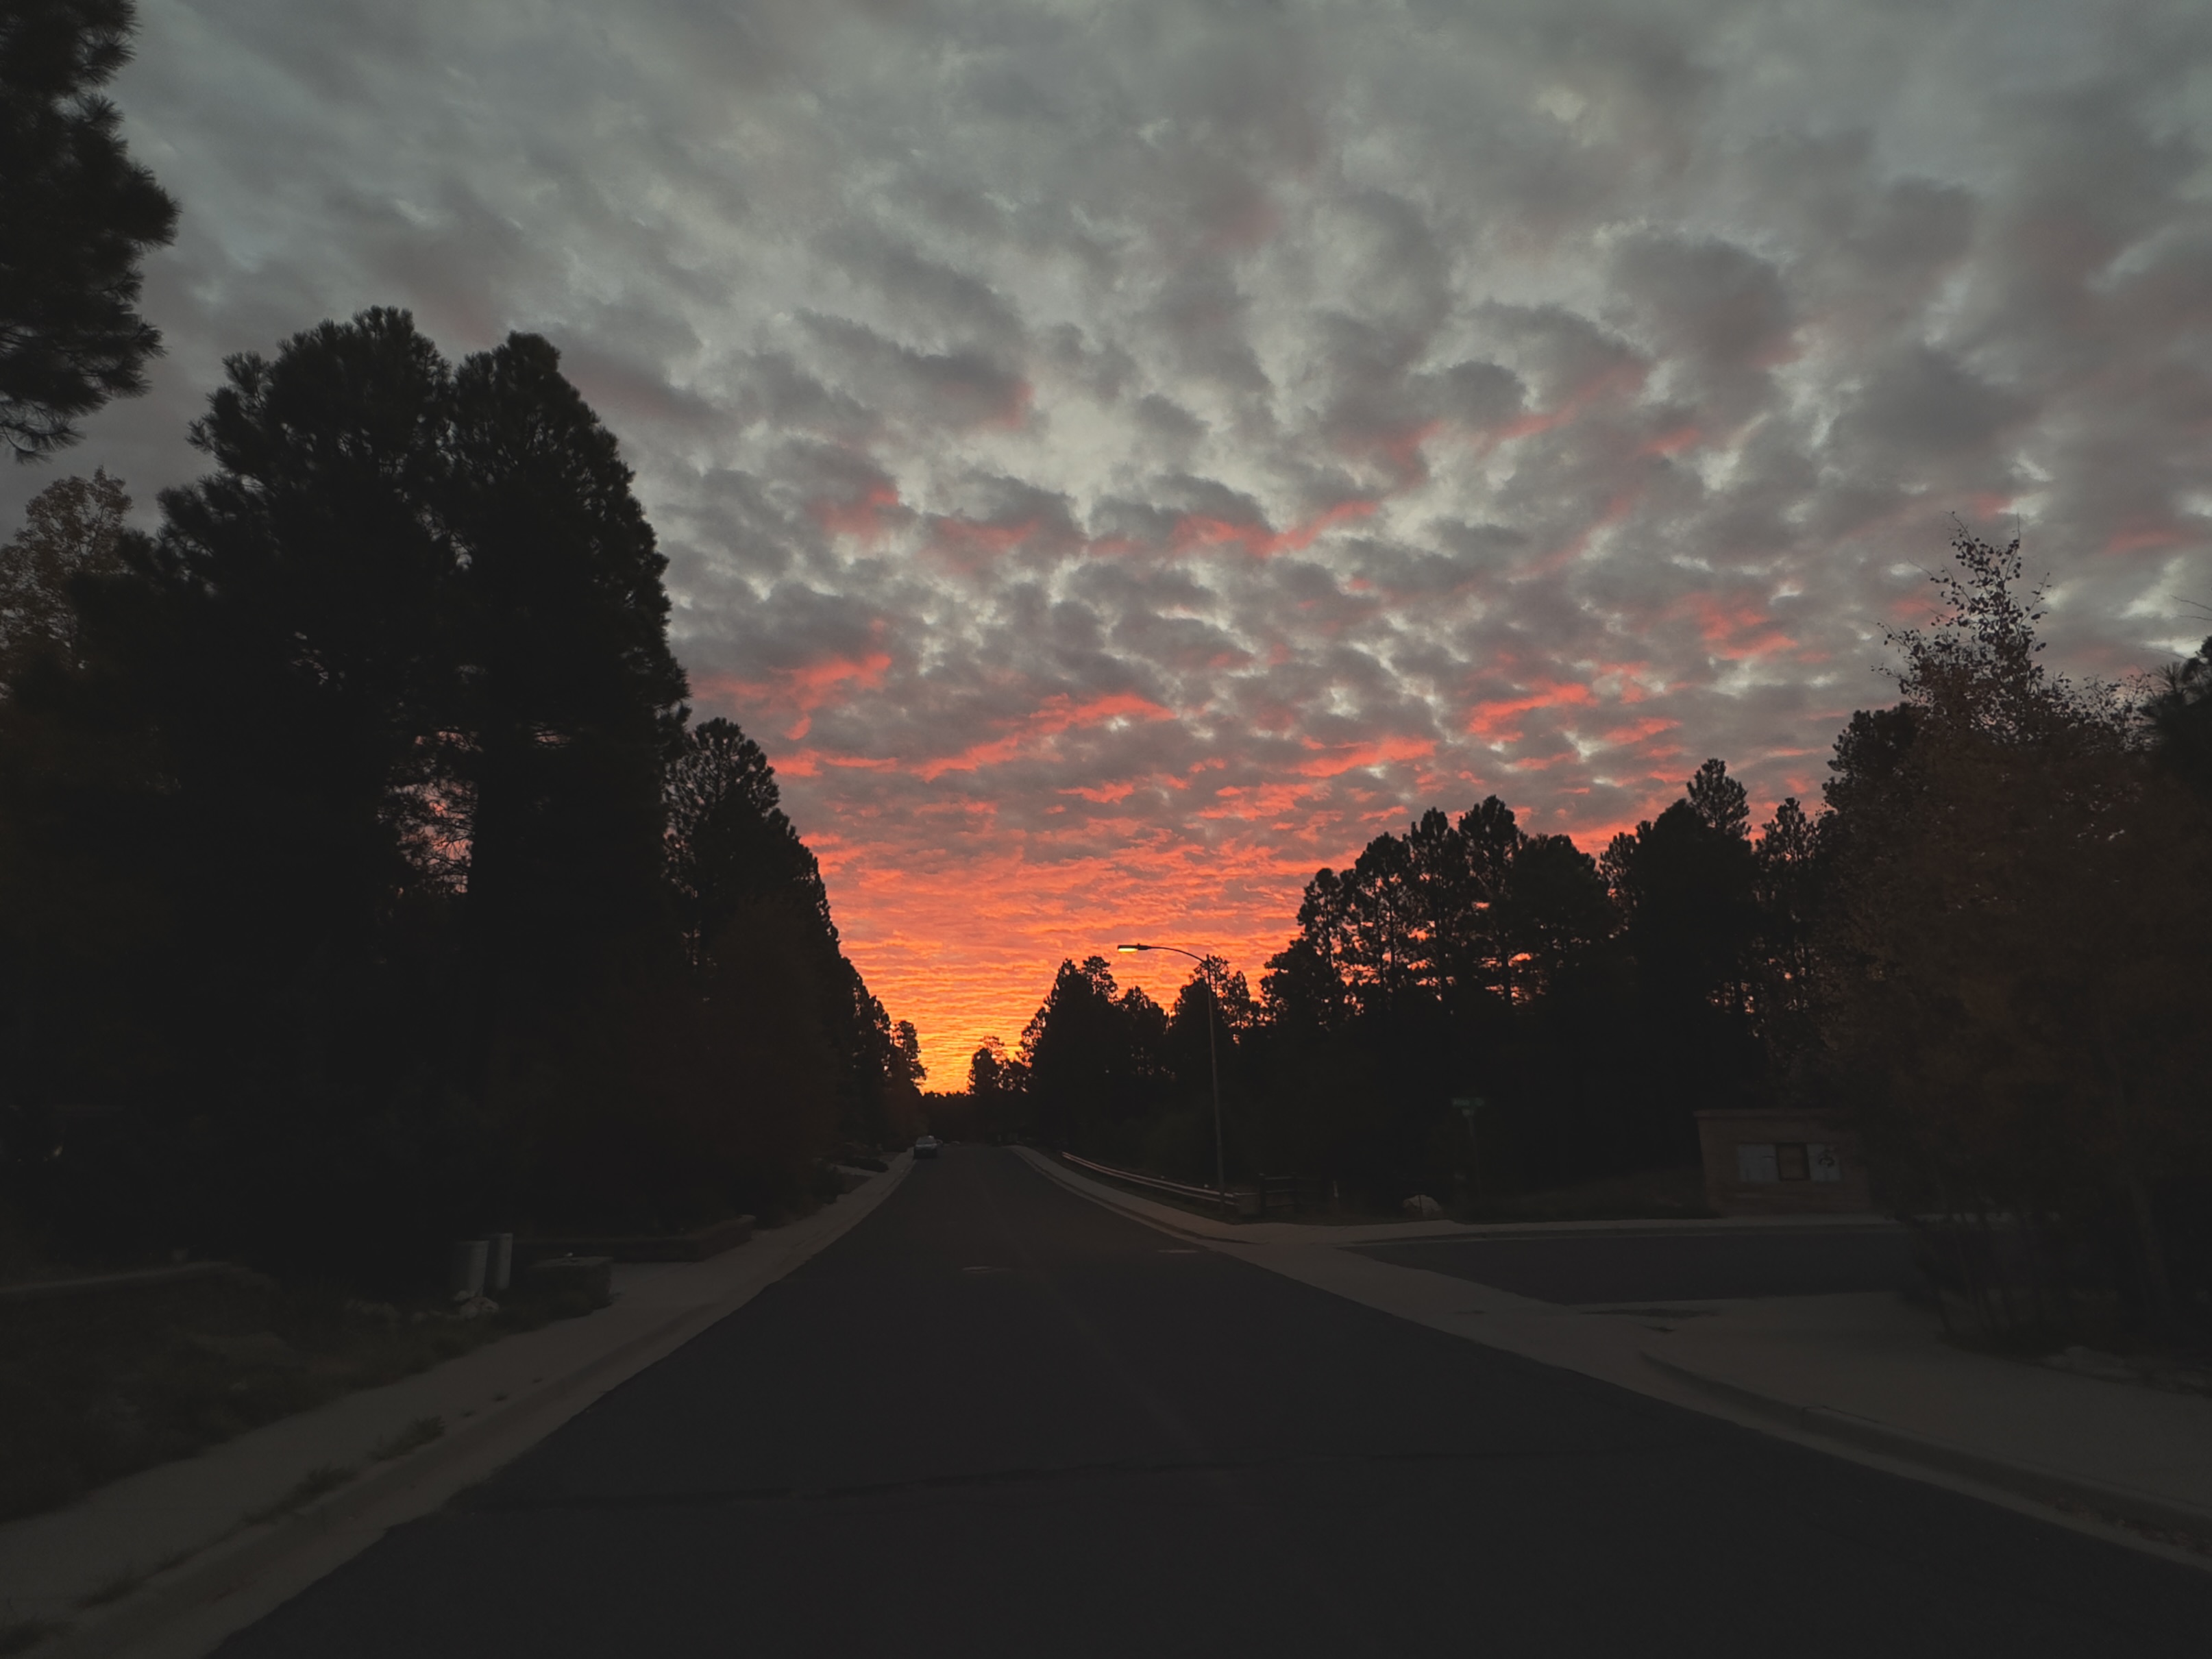 Bright pink backlit clouds above a dark line of ponderosa pines leading to the horizon